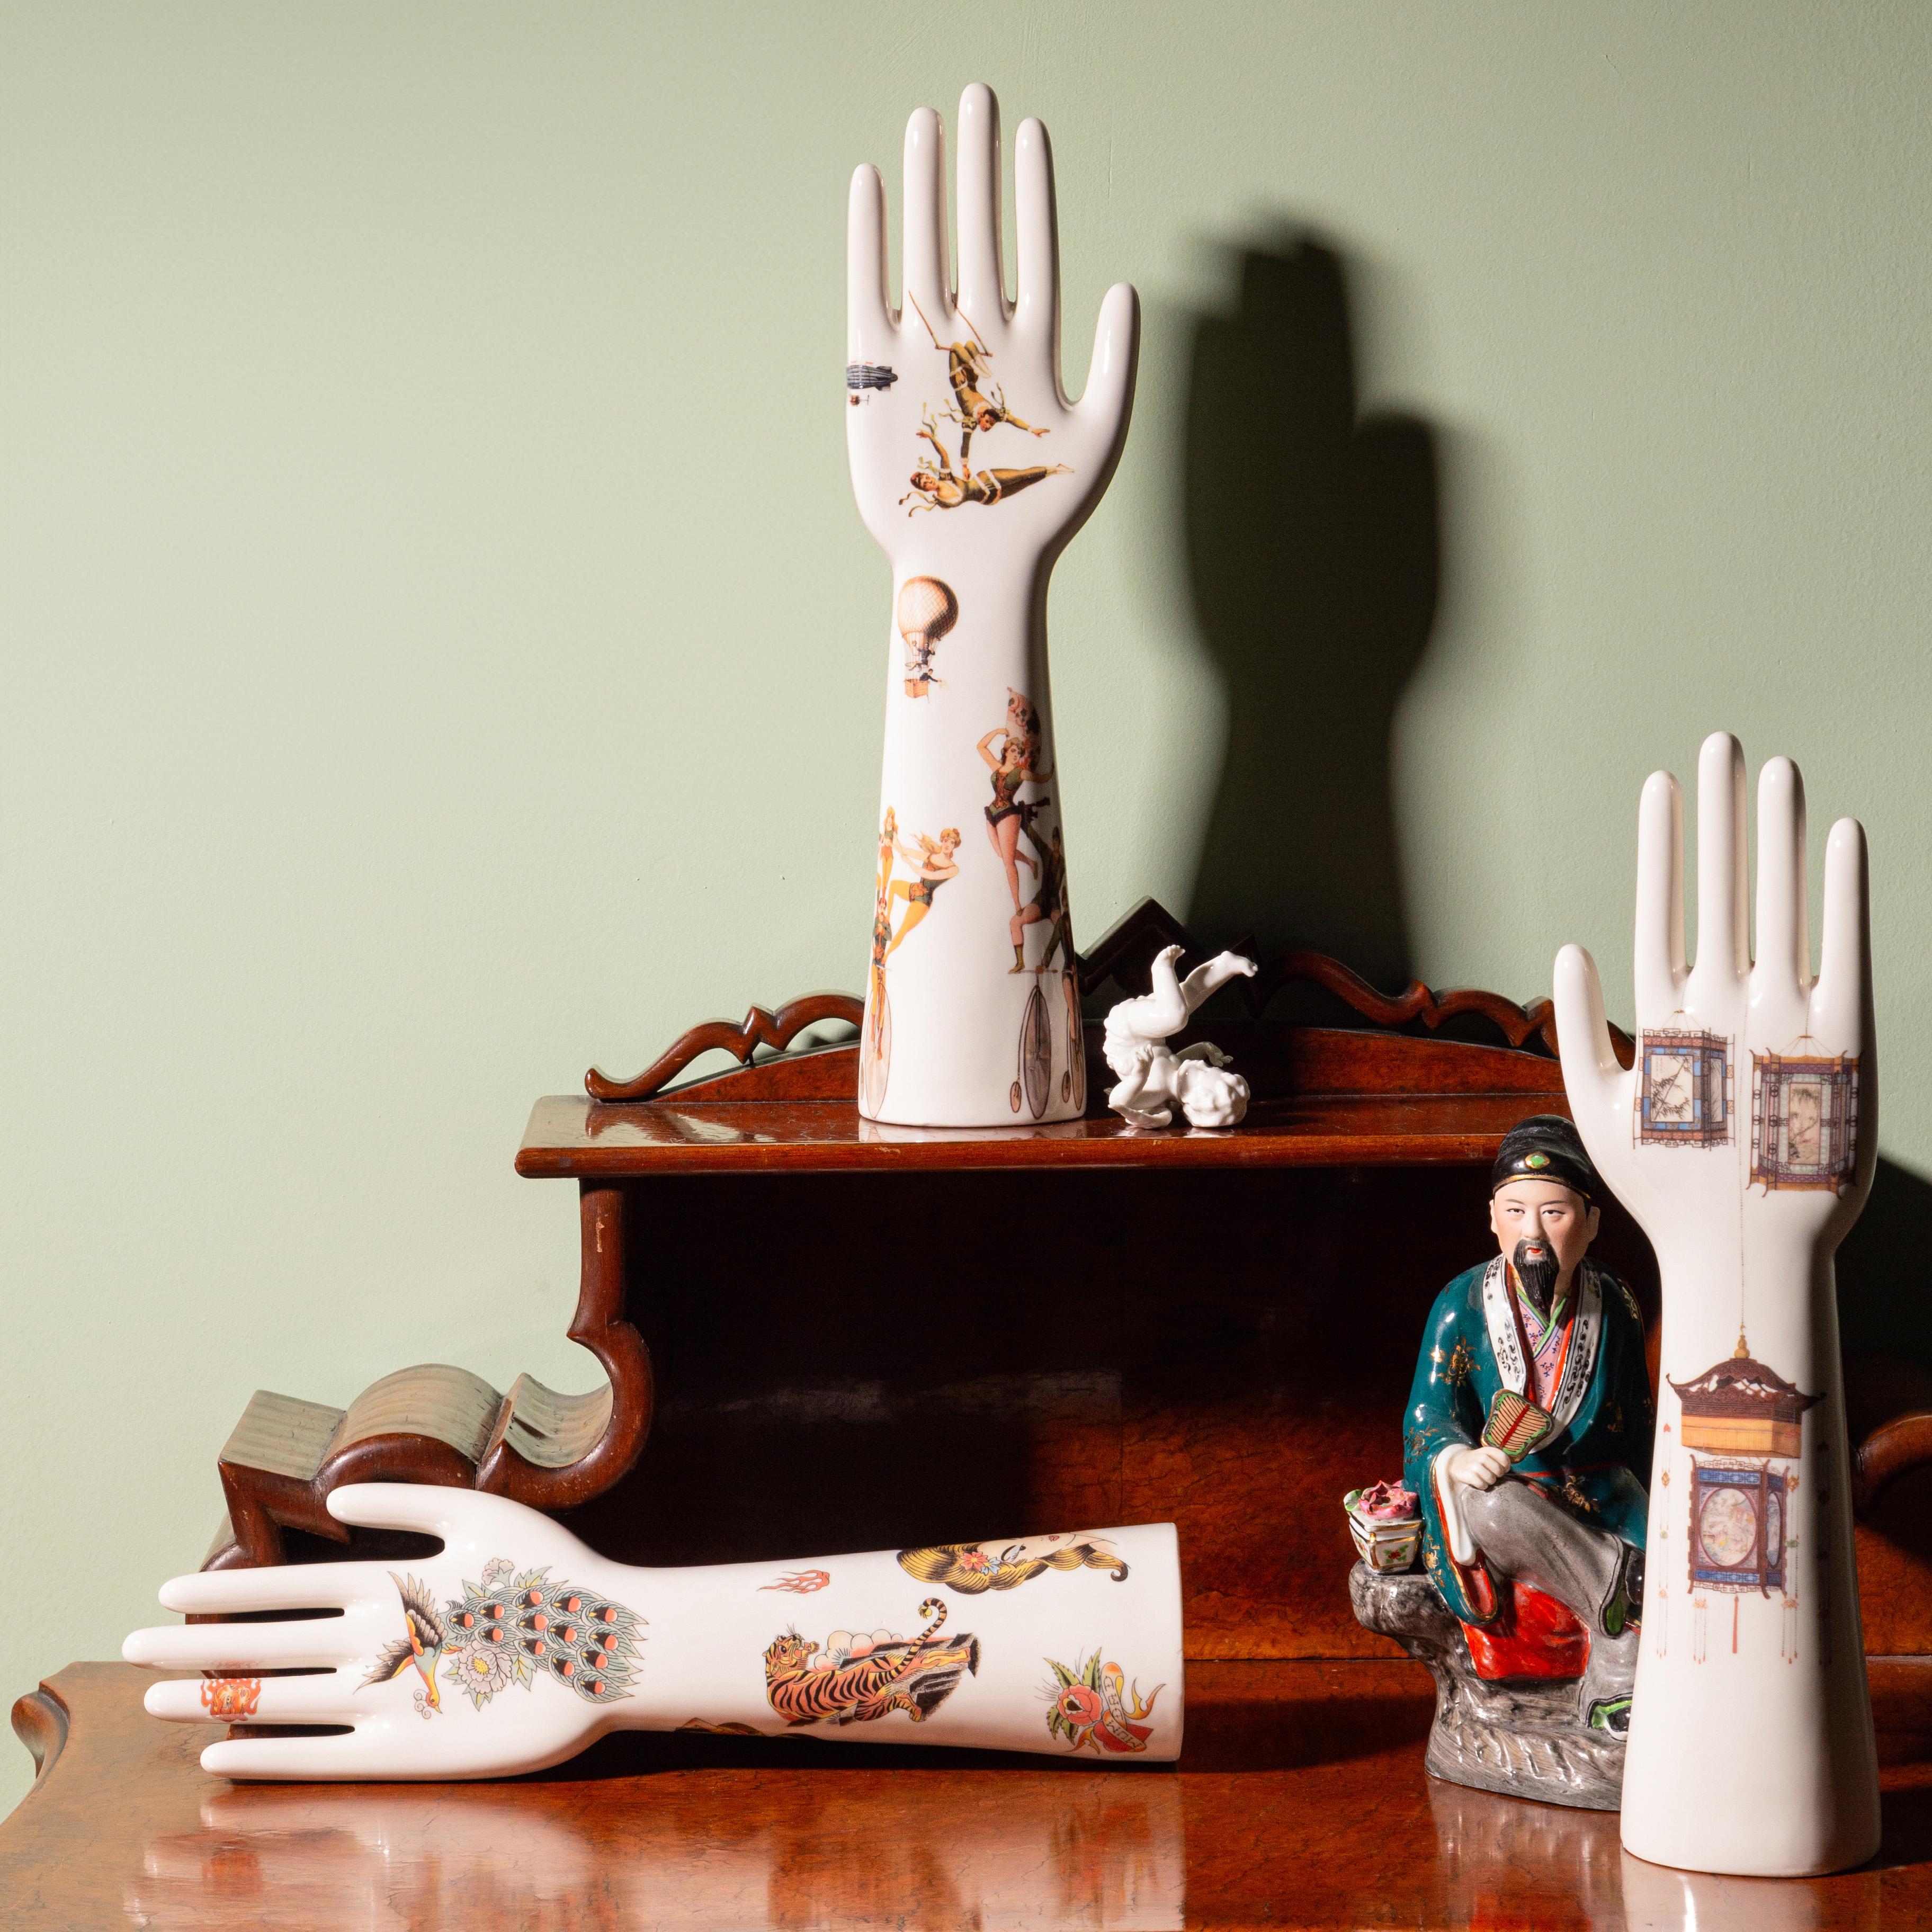 Anatomica, Porcelain Hand with Circus Artists Decoration by Vito Nesta For Sale 1